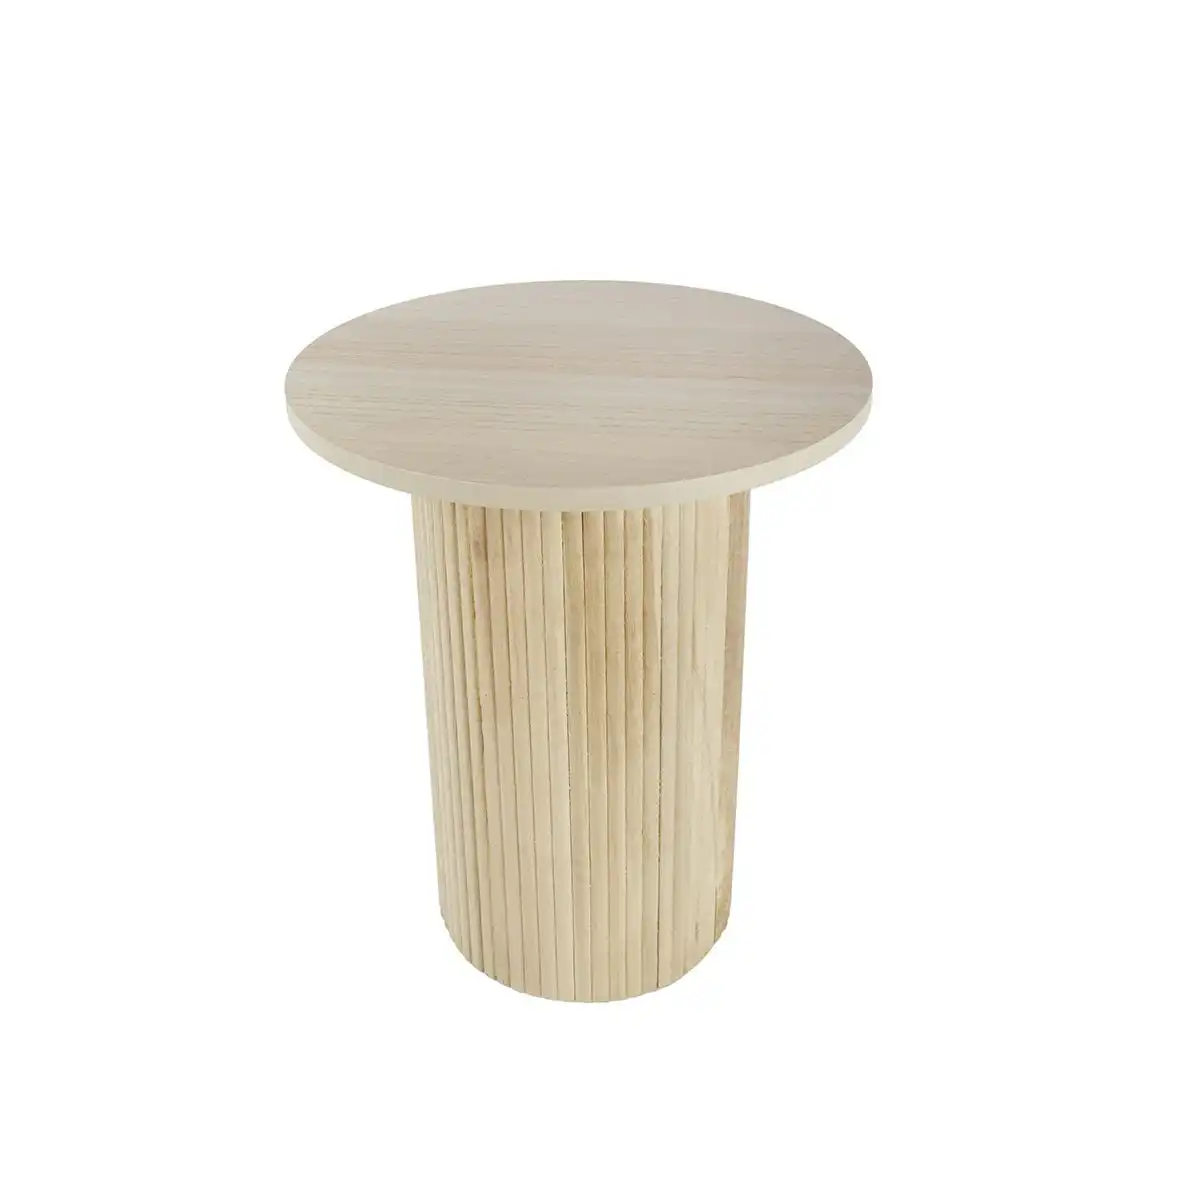 40cm Aimee Fluted Round Coffee Table Natural